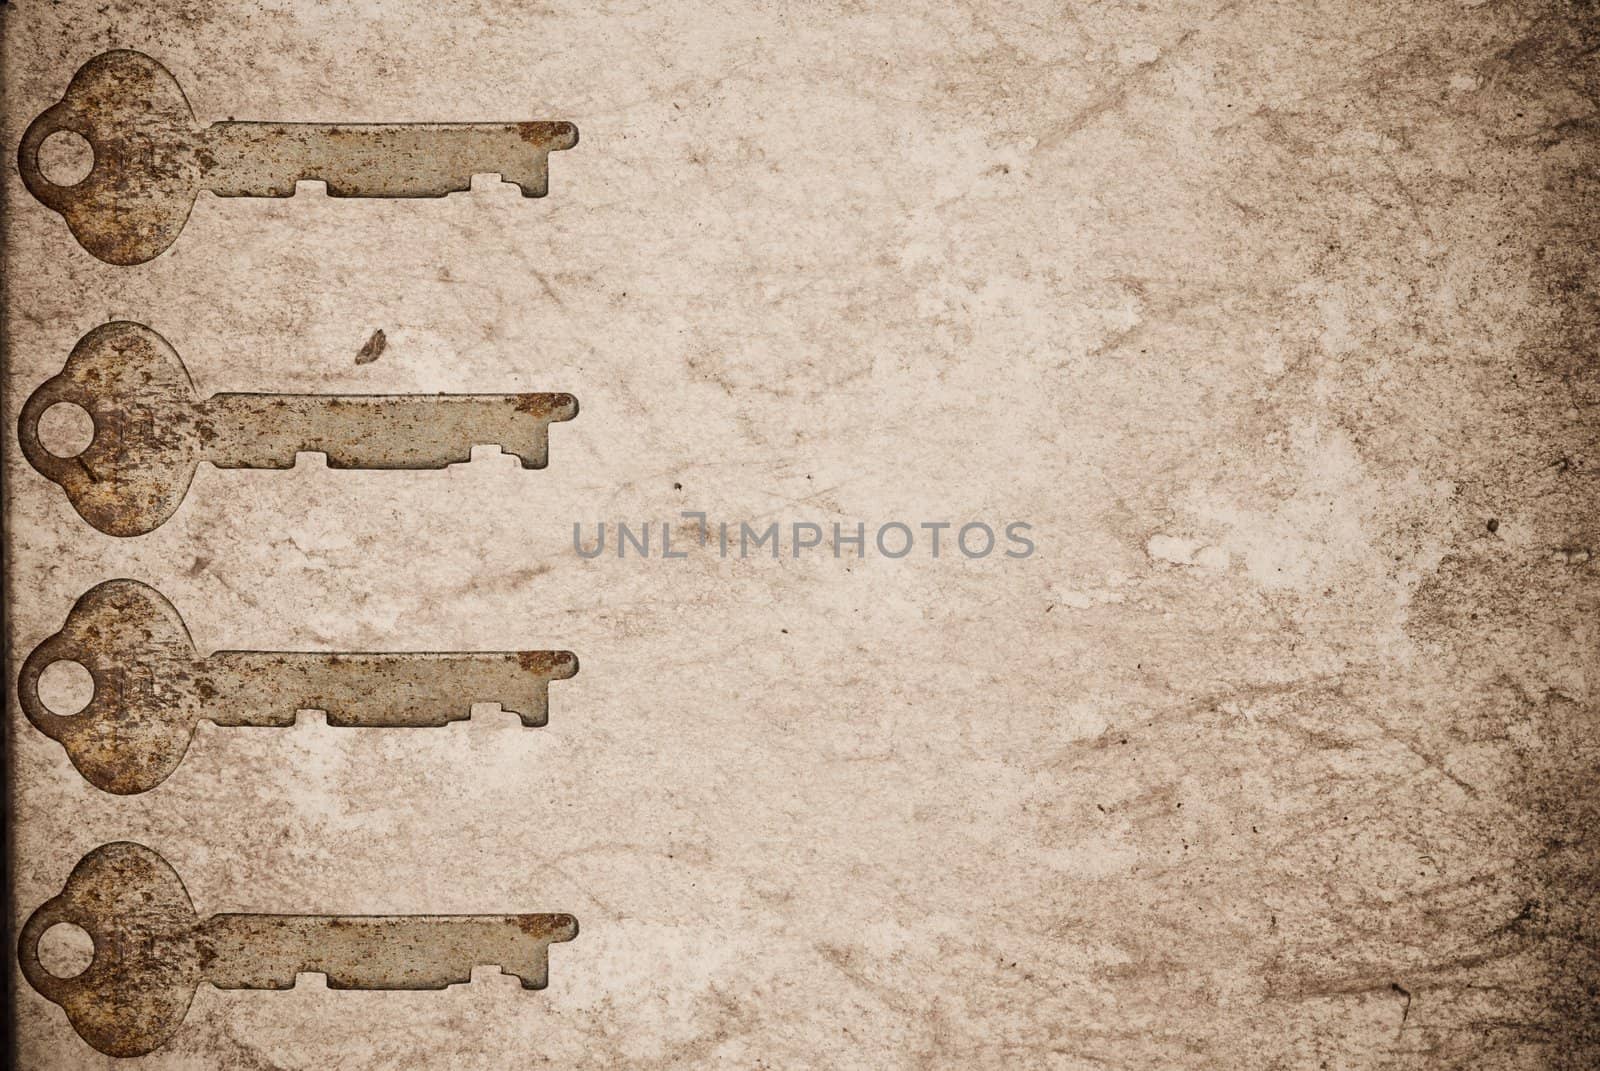 Rusty keys on old paper background
 by sasilsolutions